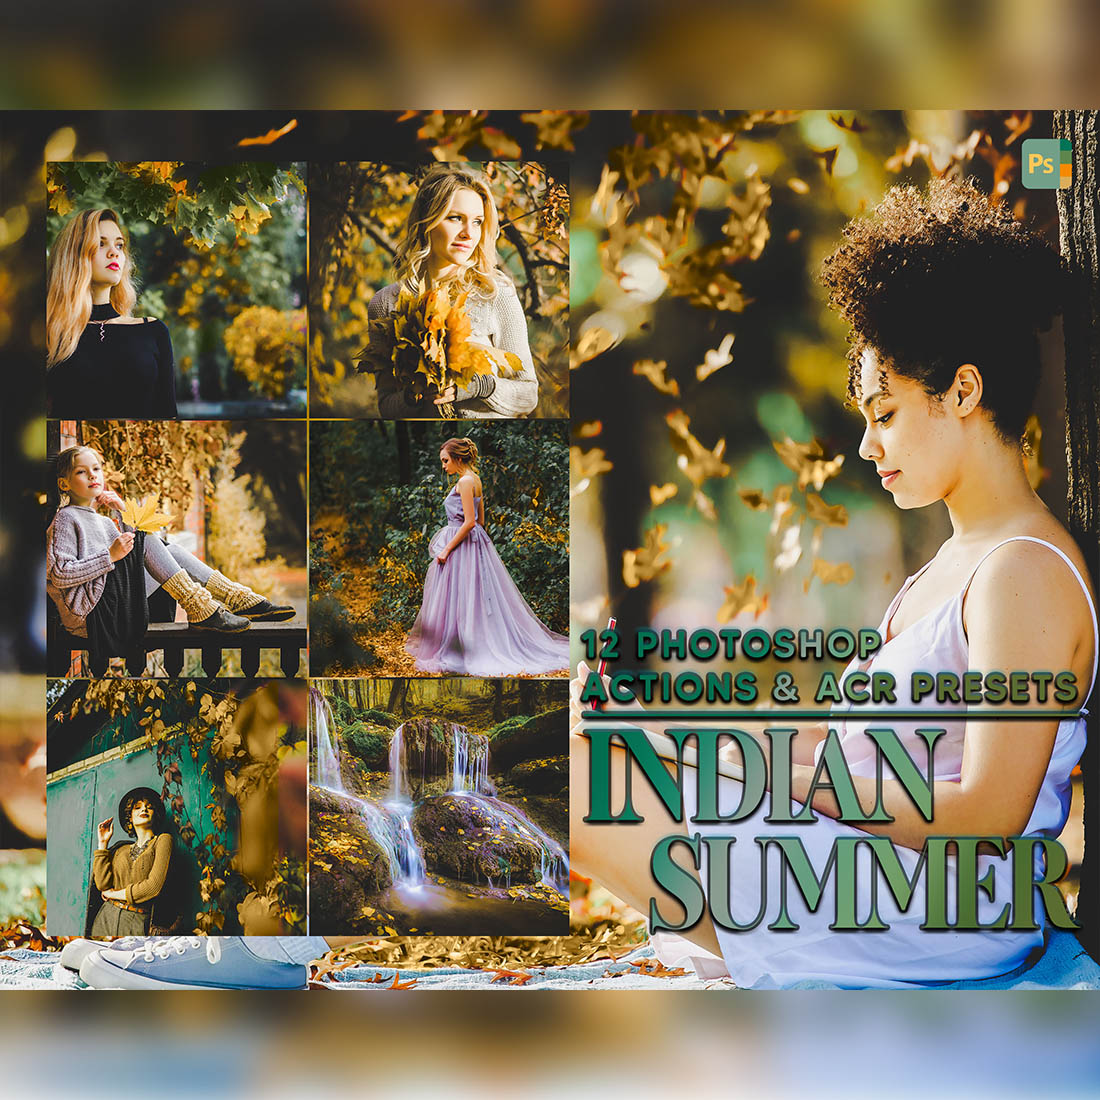 12 Photoshop Actions, Indian Summer Ps Action, Autumn ACR Preset, Fall Yellow Ps Filter, Portrait And Lifestyle Theme For Instagram, Blogger cover image.